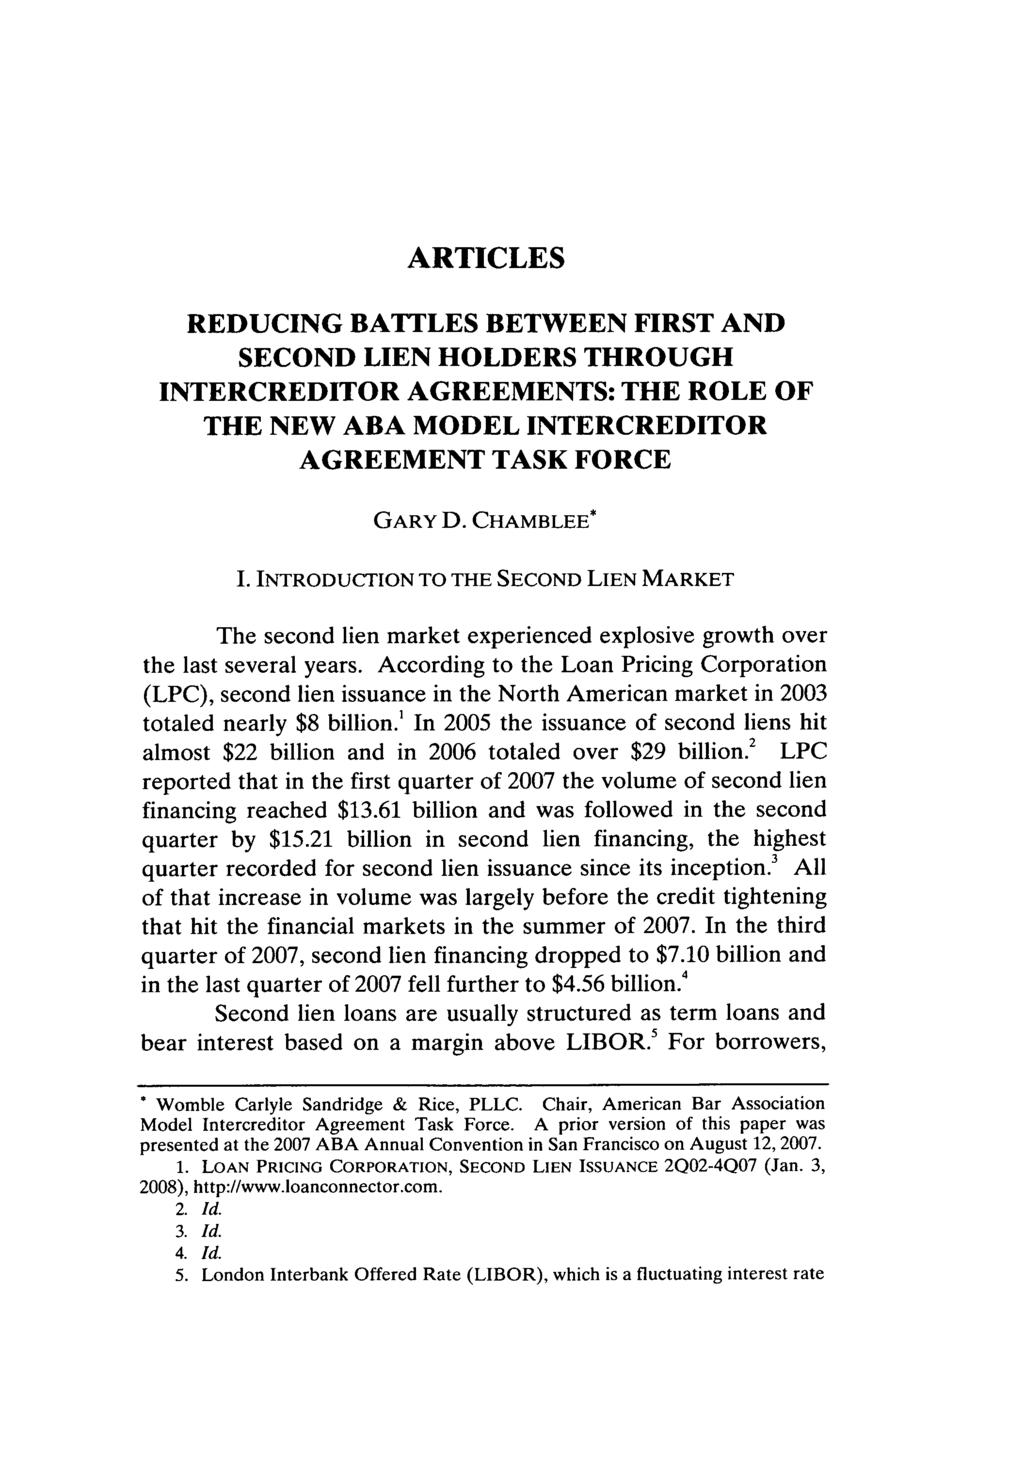 ARTICLES REDUCING BATTLES BETWEEN FIRST AND SECOND LIEN HOLDERS THROUGH INTERCREDITOR AGREEMENTS: THE ROLE OF THE NEW ABA MODEL INTERCREDITOR AGREEMENT TASK FORCE GARY D. CHAMBLEE* I.